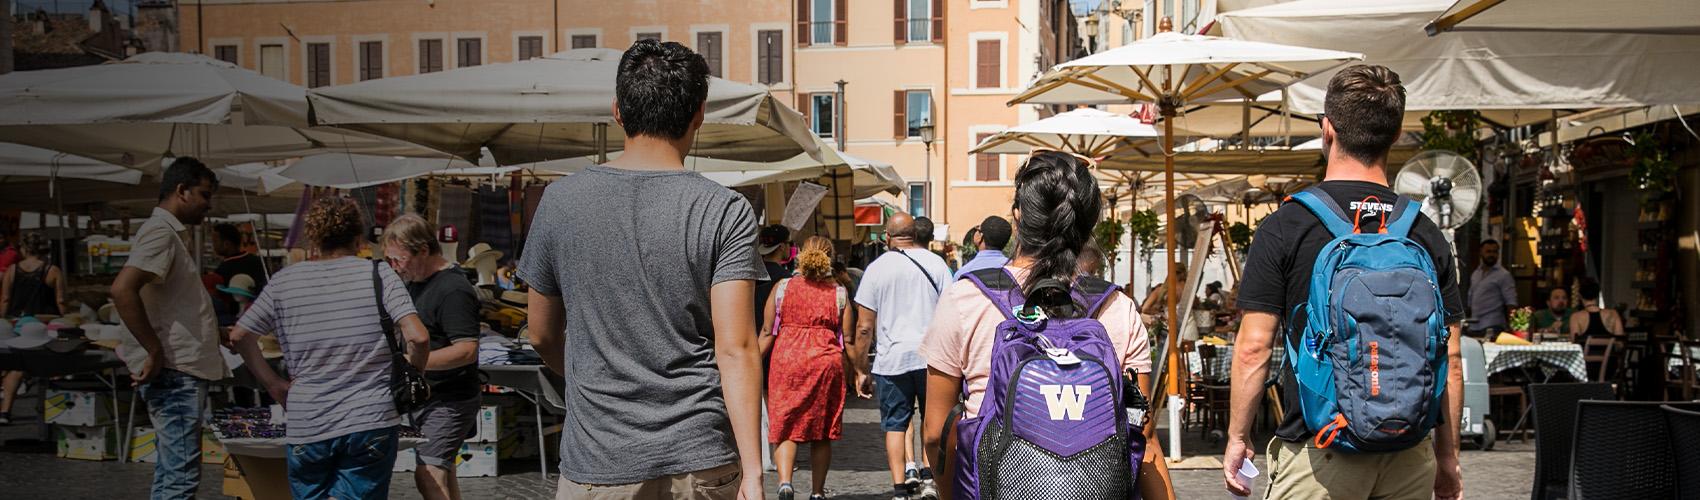 Group of students, one wearing a UW backpack, in a bustling foreign market